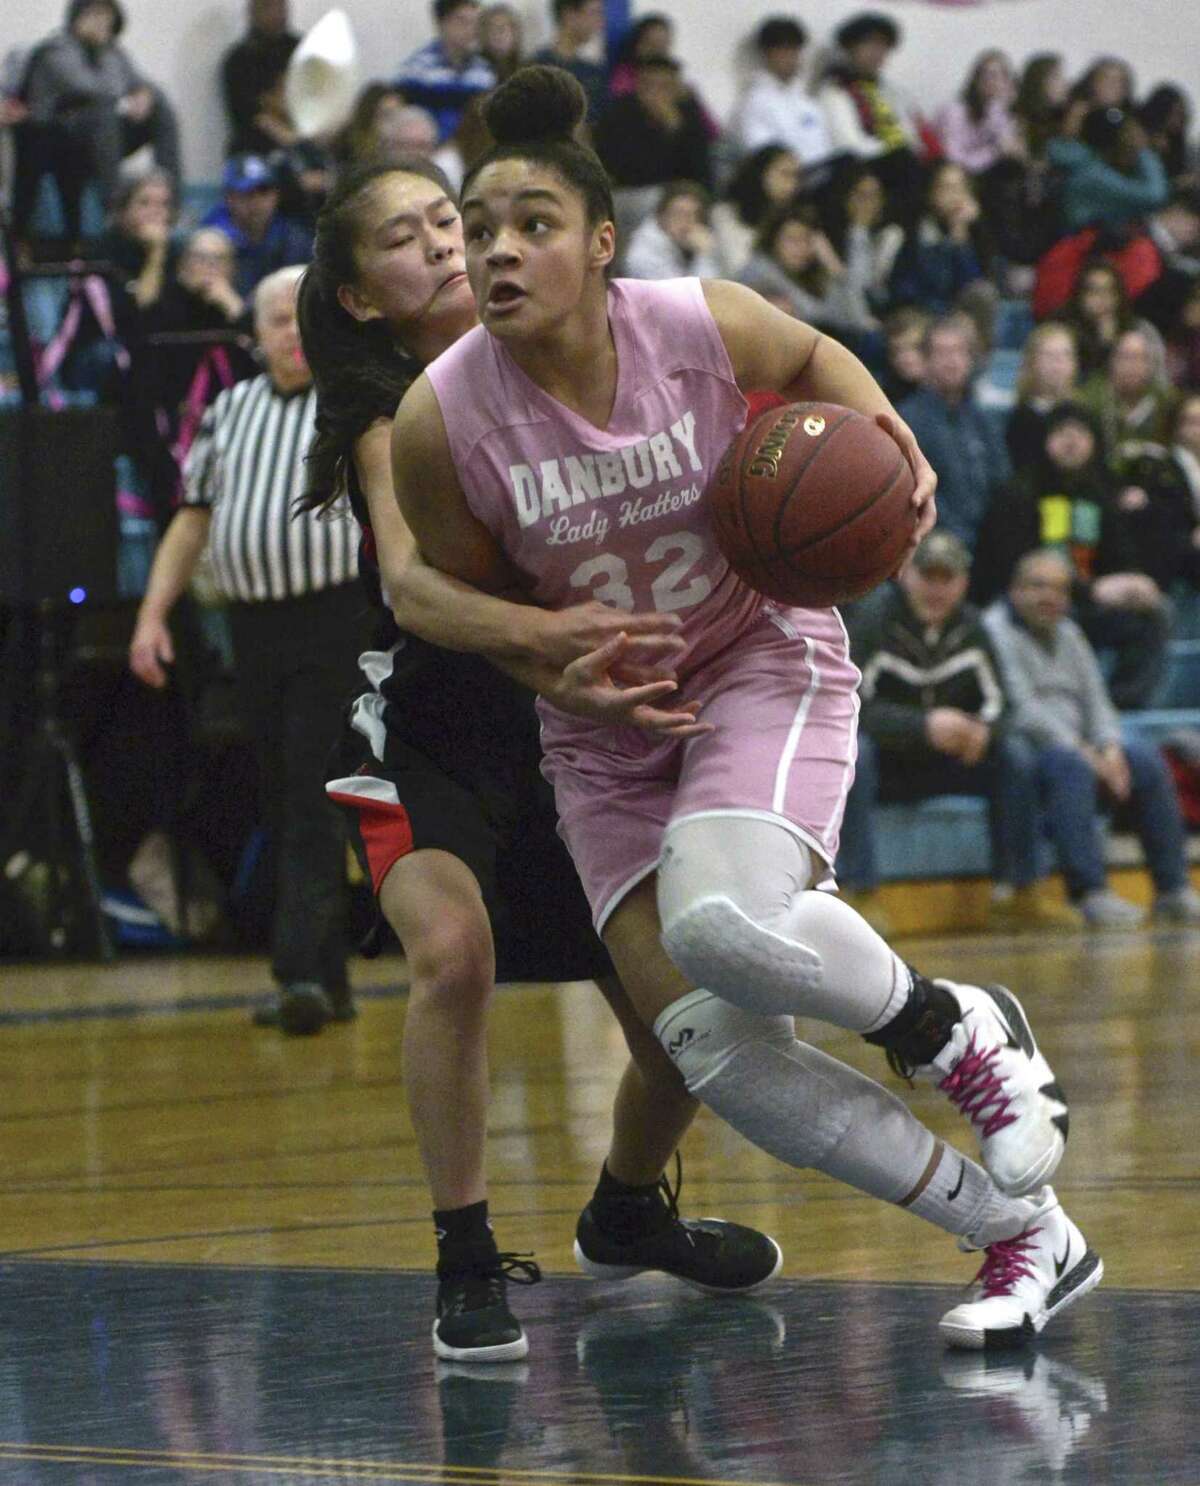 Danbury's Kianna Perry (32) drives past Warde's Ava Fitzpatrick (4) in the girls basketball game between Fairfield Warde and Danbury high schools, Friday night, January 25, 2019, at Danbury High School, Danbury, Conn.